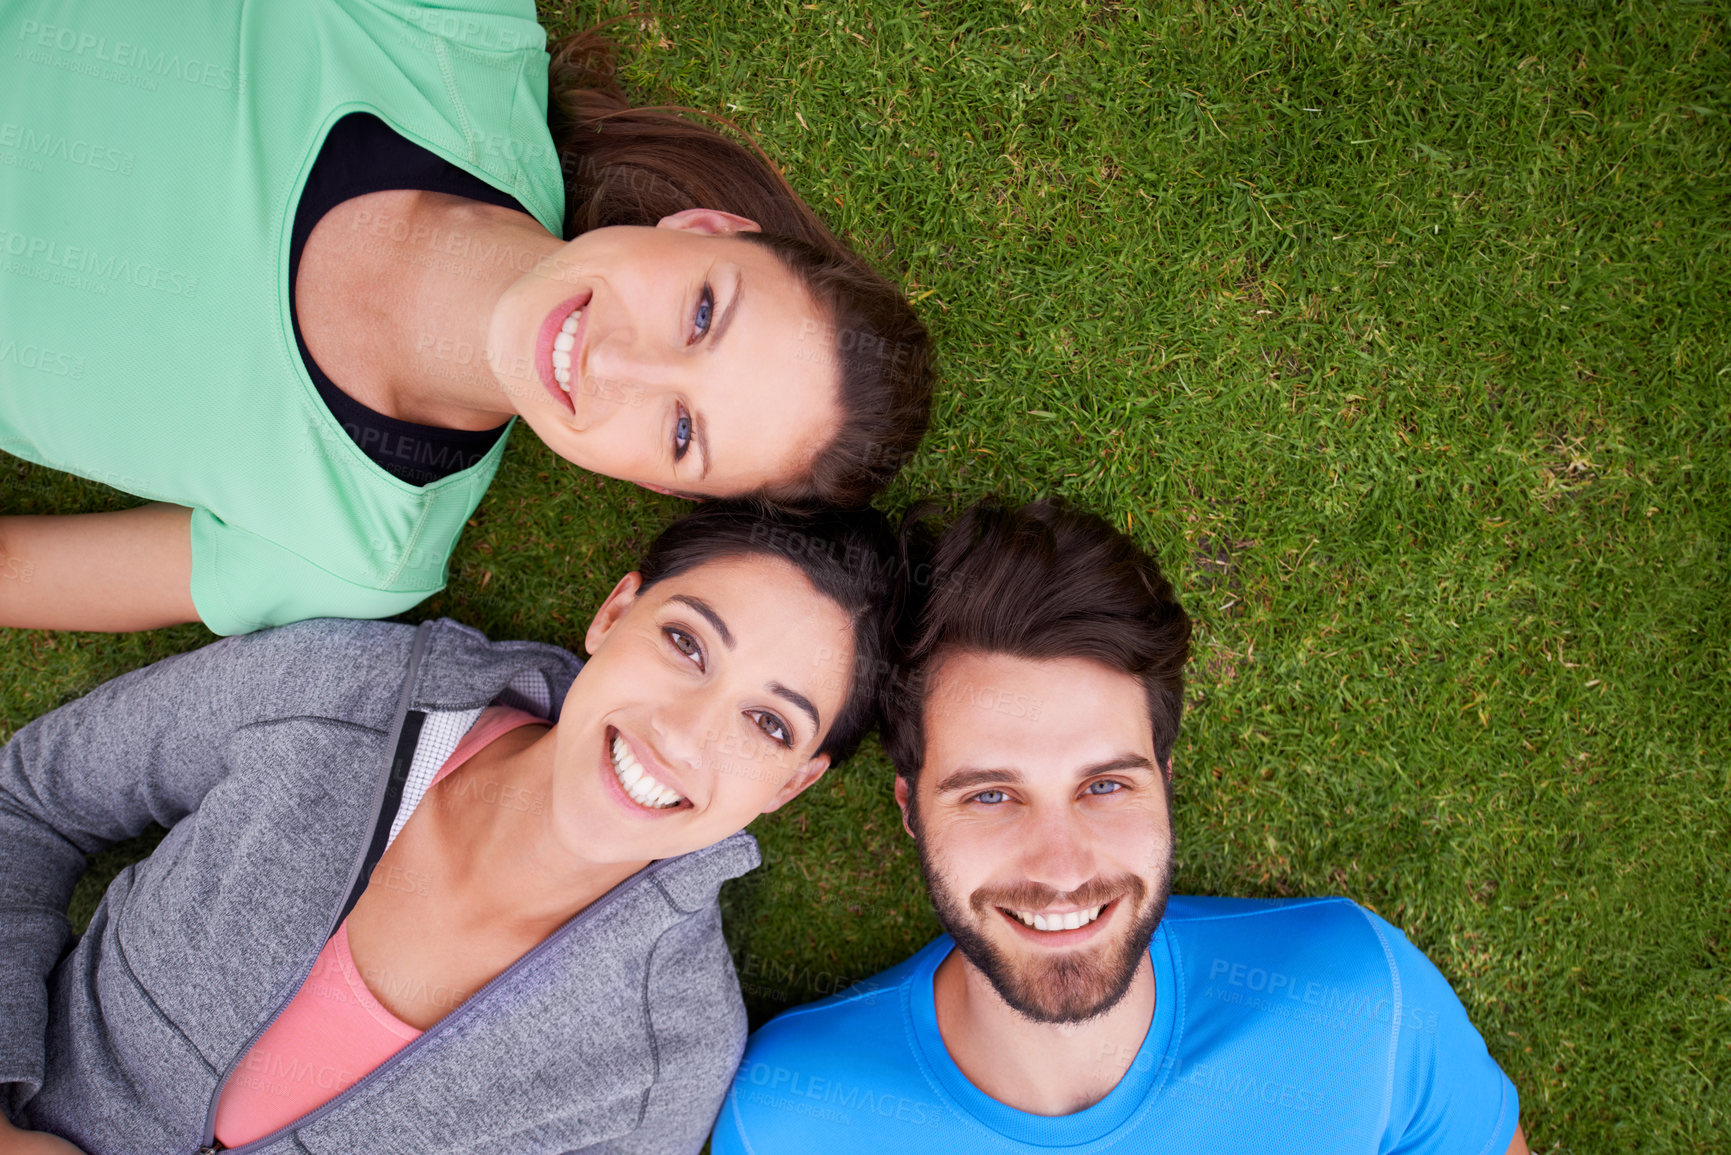 Buy stock photo High angle shot of a three friends lying down on grass